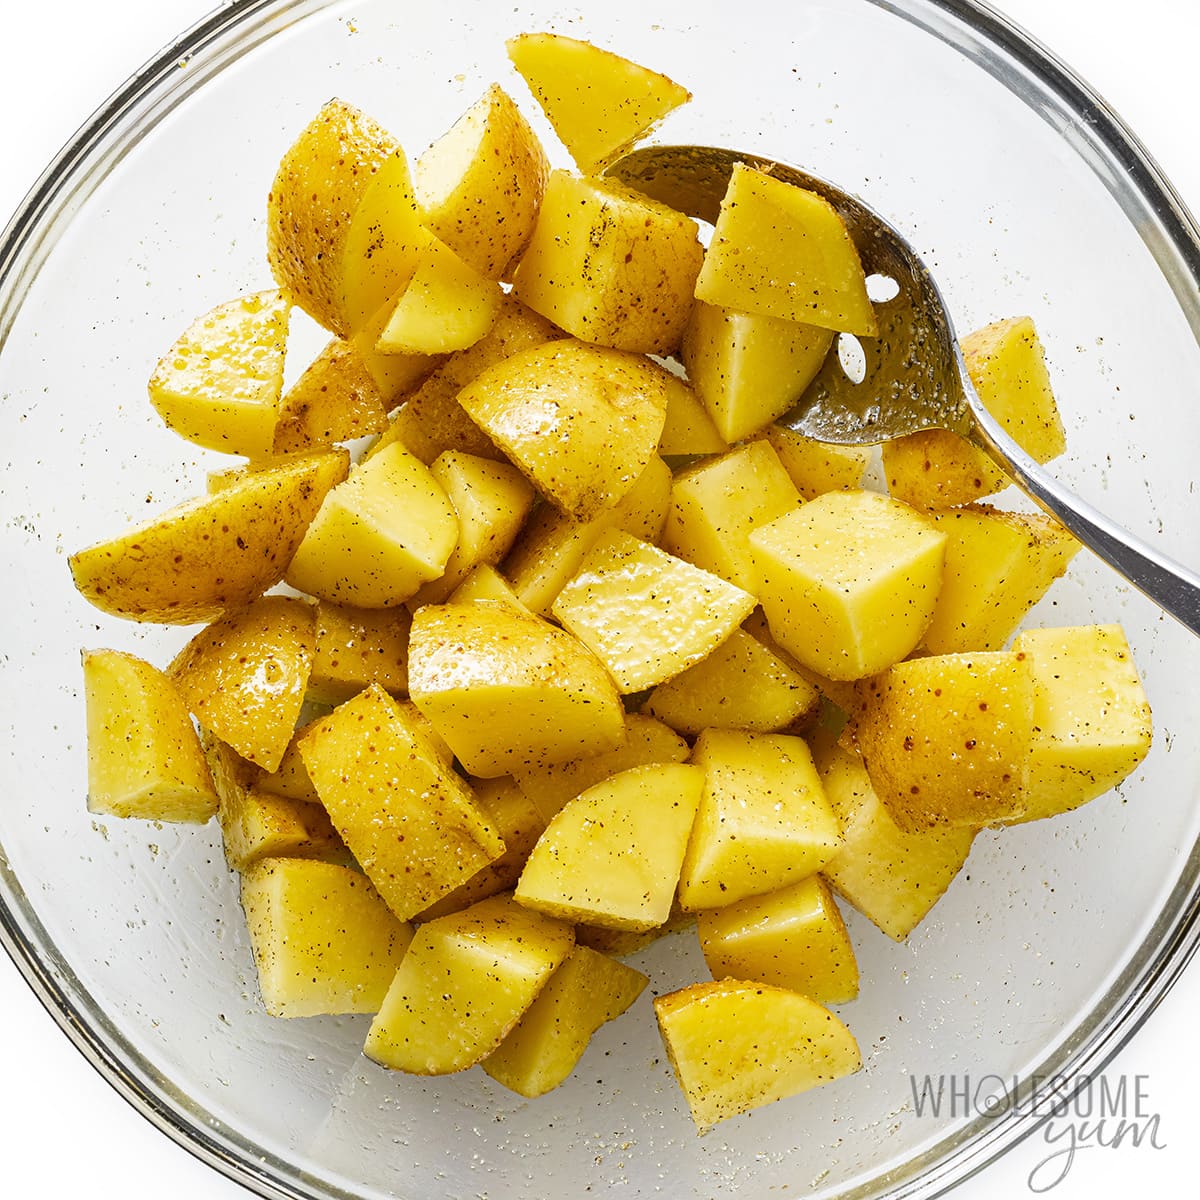 Cubed potatoes in a bowl with seasonings.